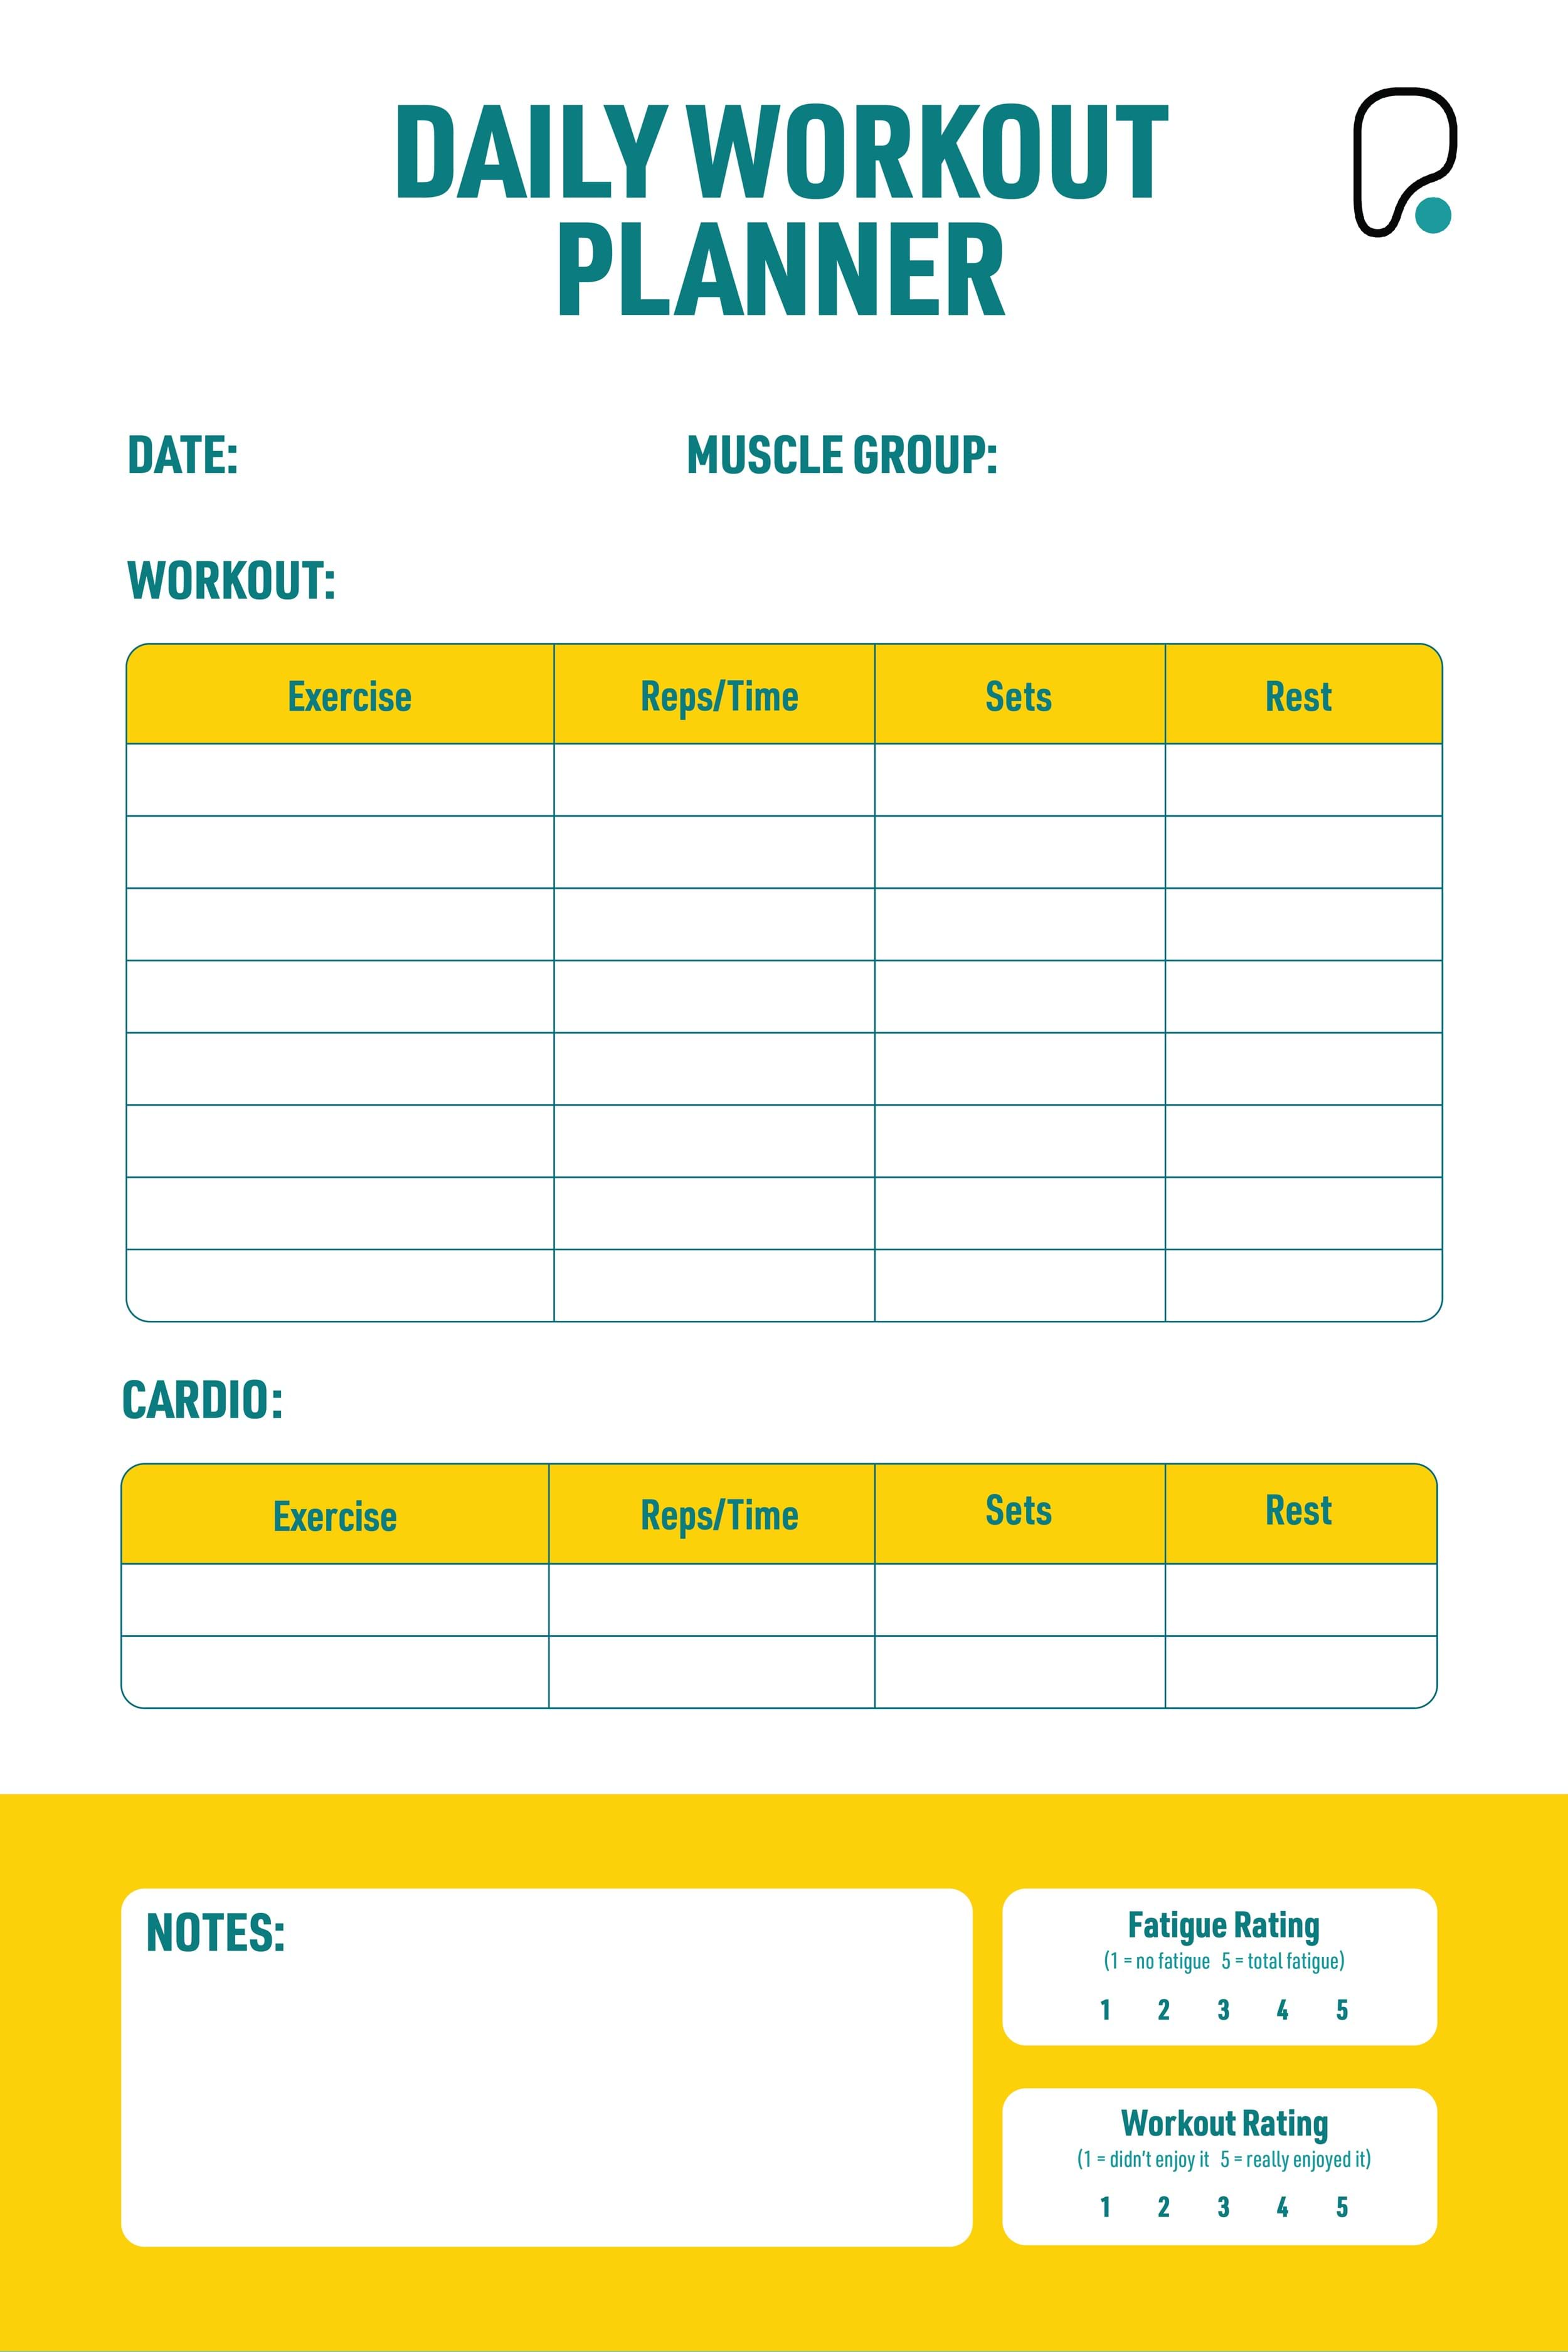 create your own workout assignment